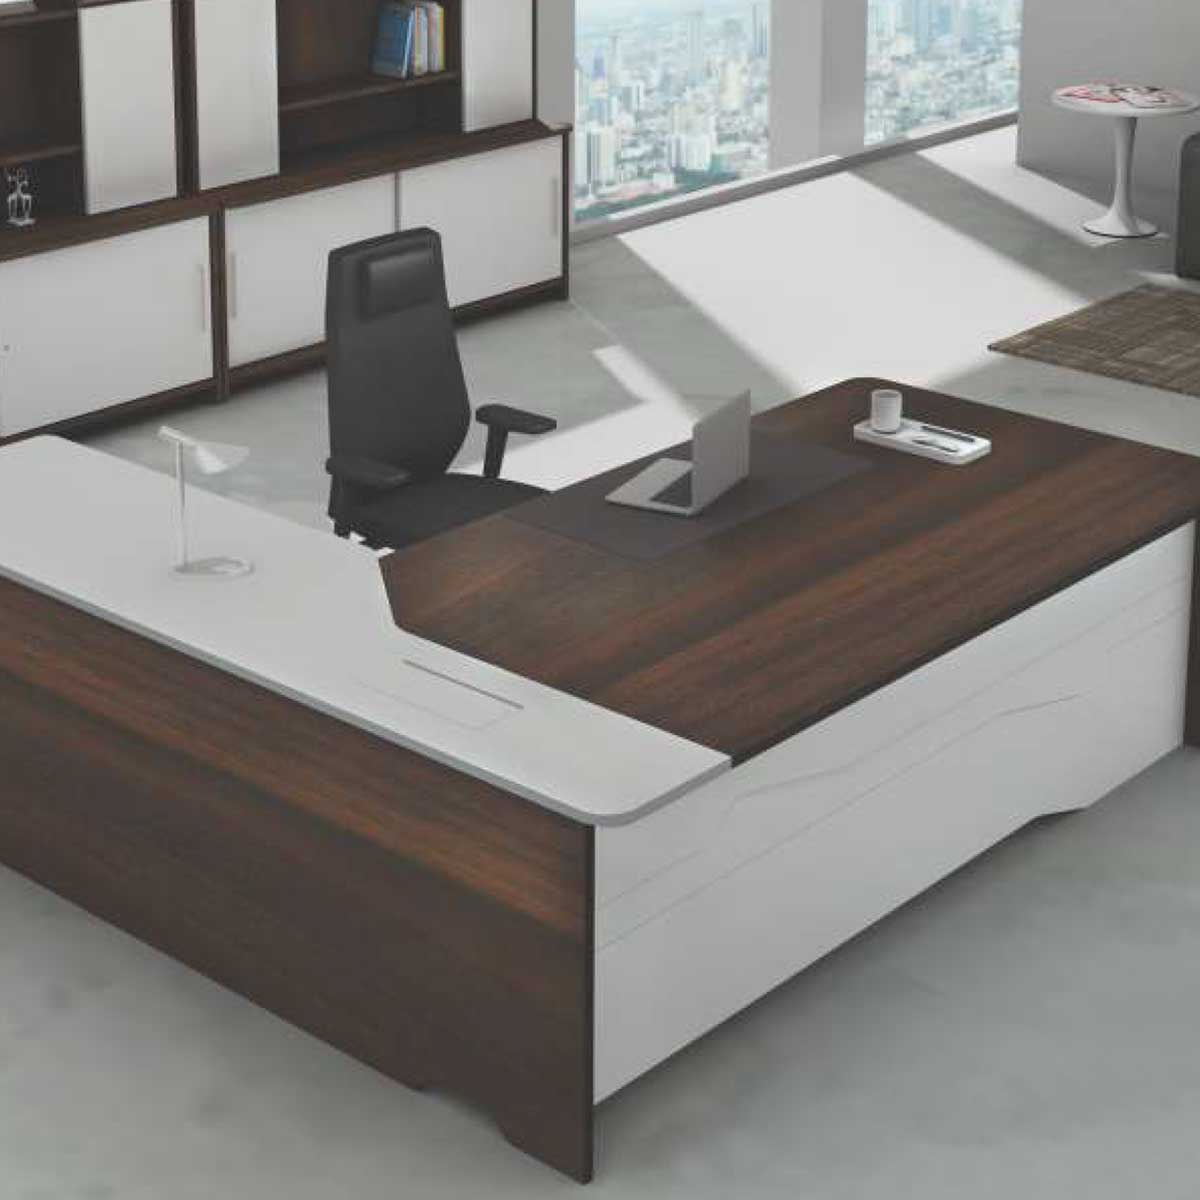 Manager Table Manufacturers, Suppliers in Noida Sector 100